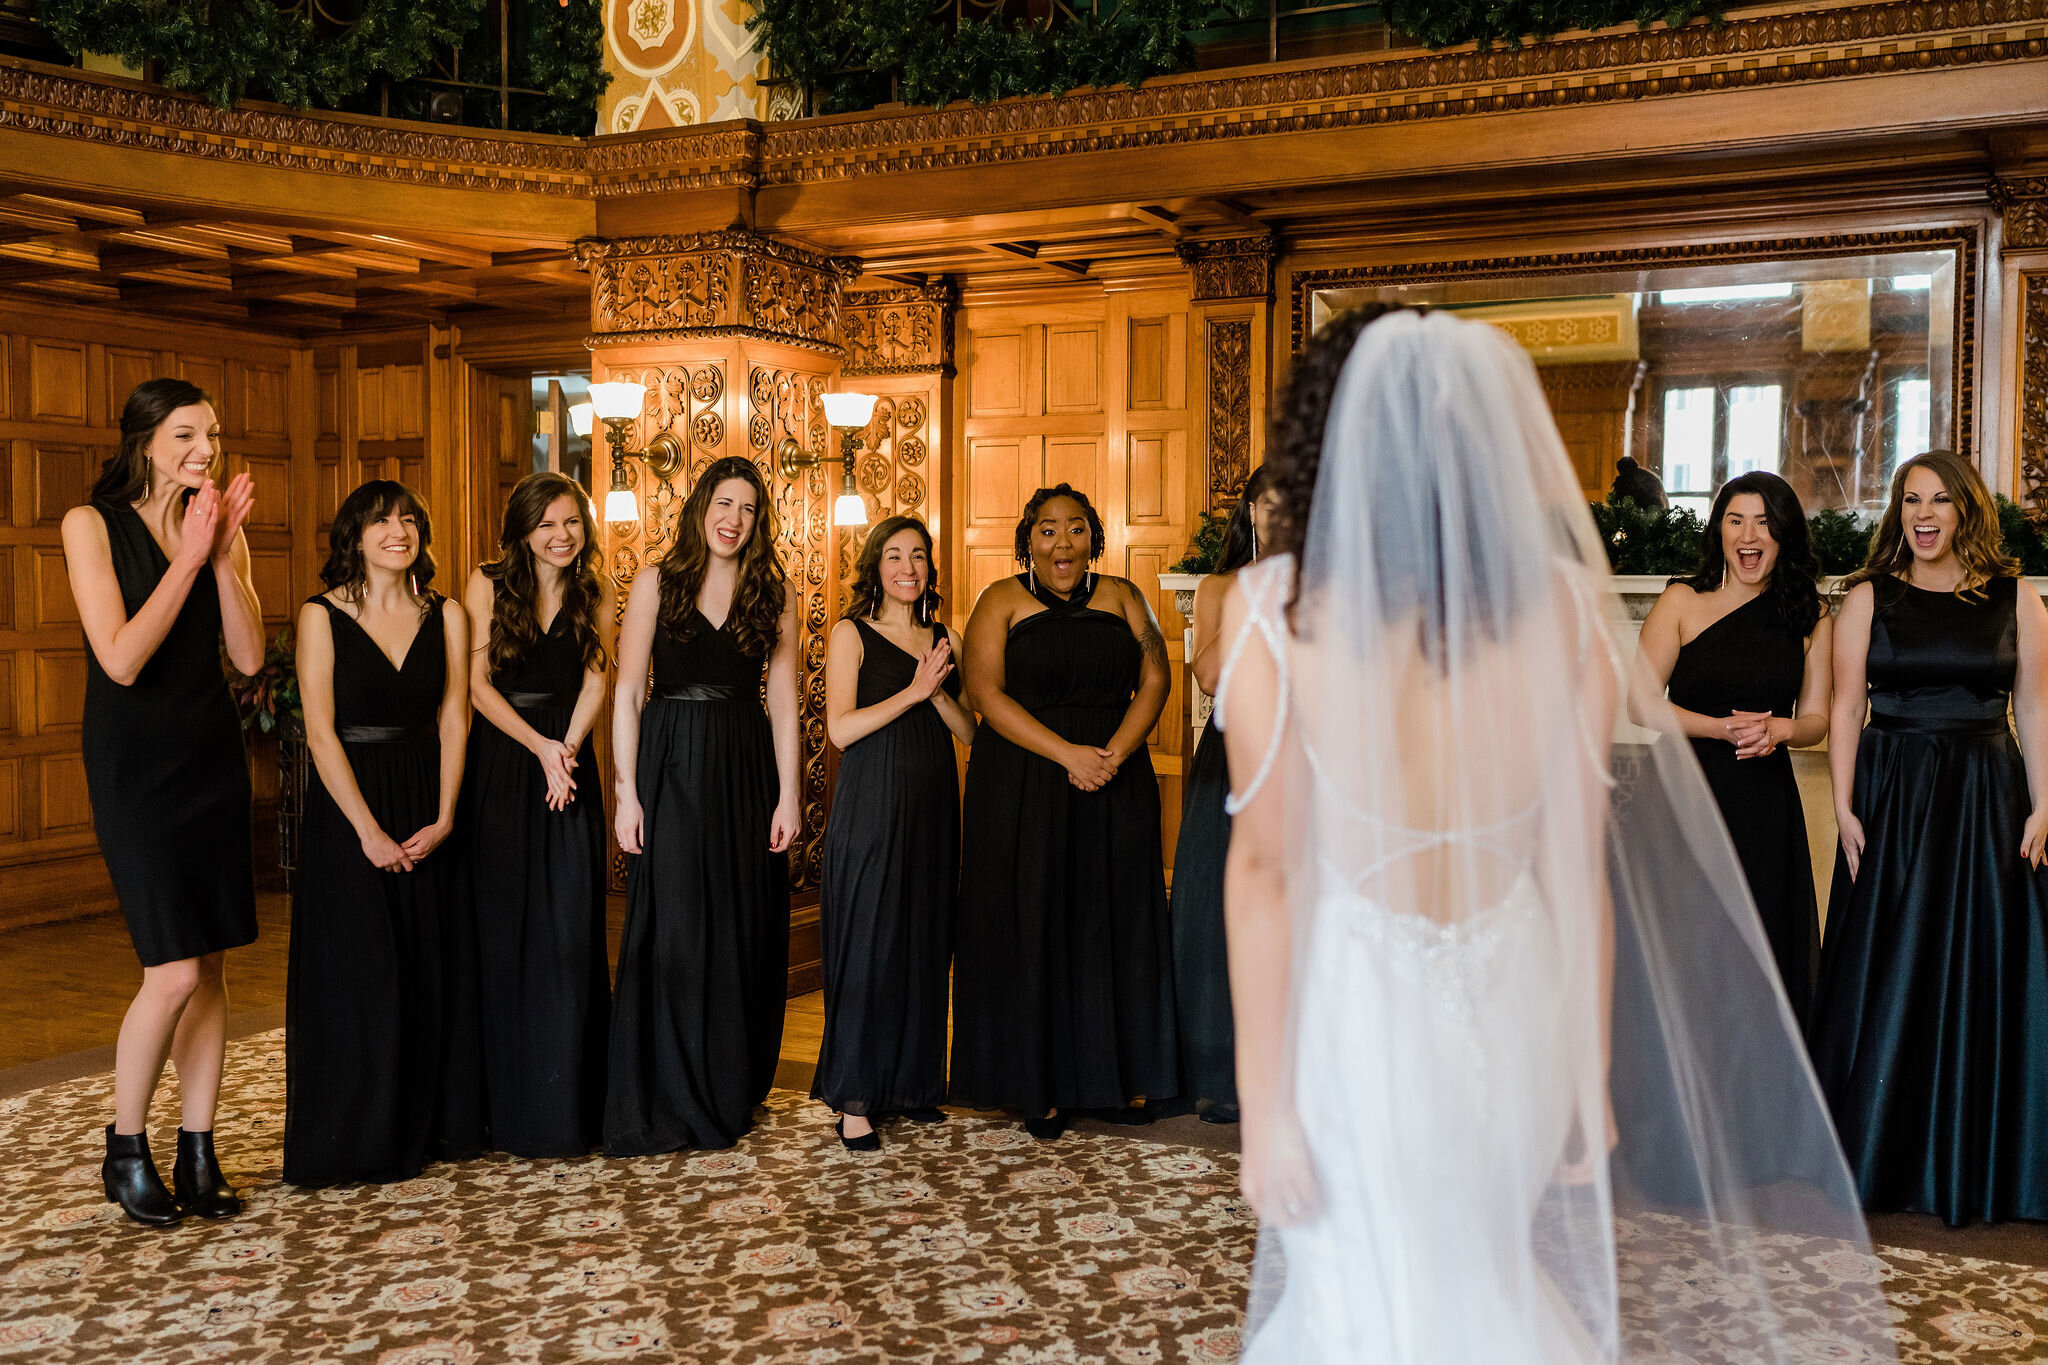 Bride's first look with her bridesmaids